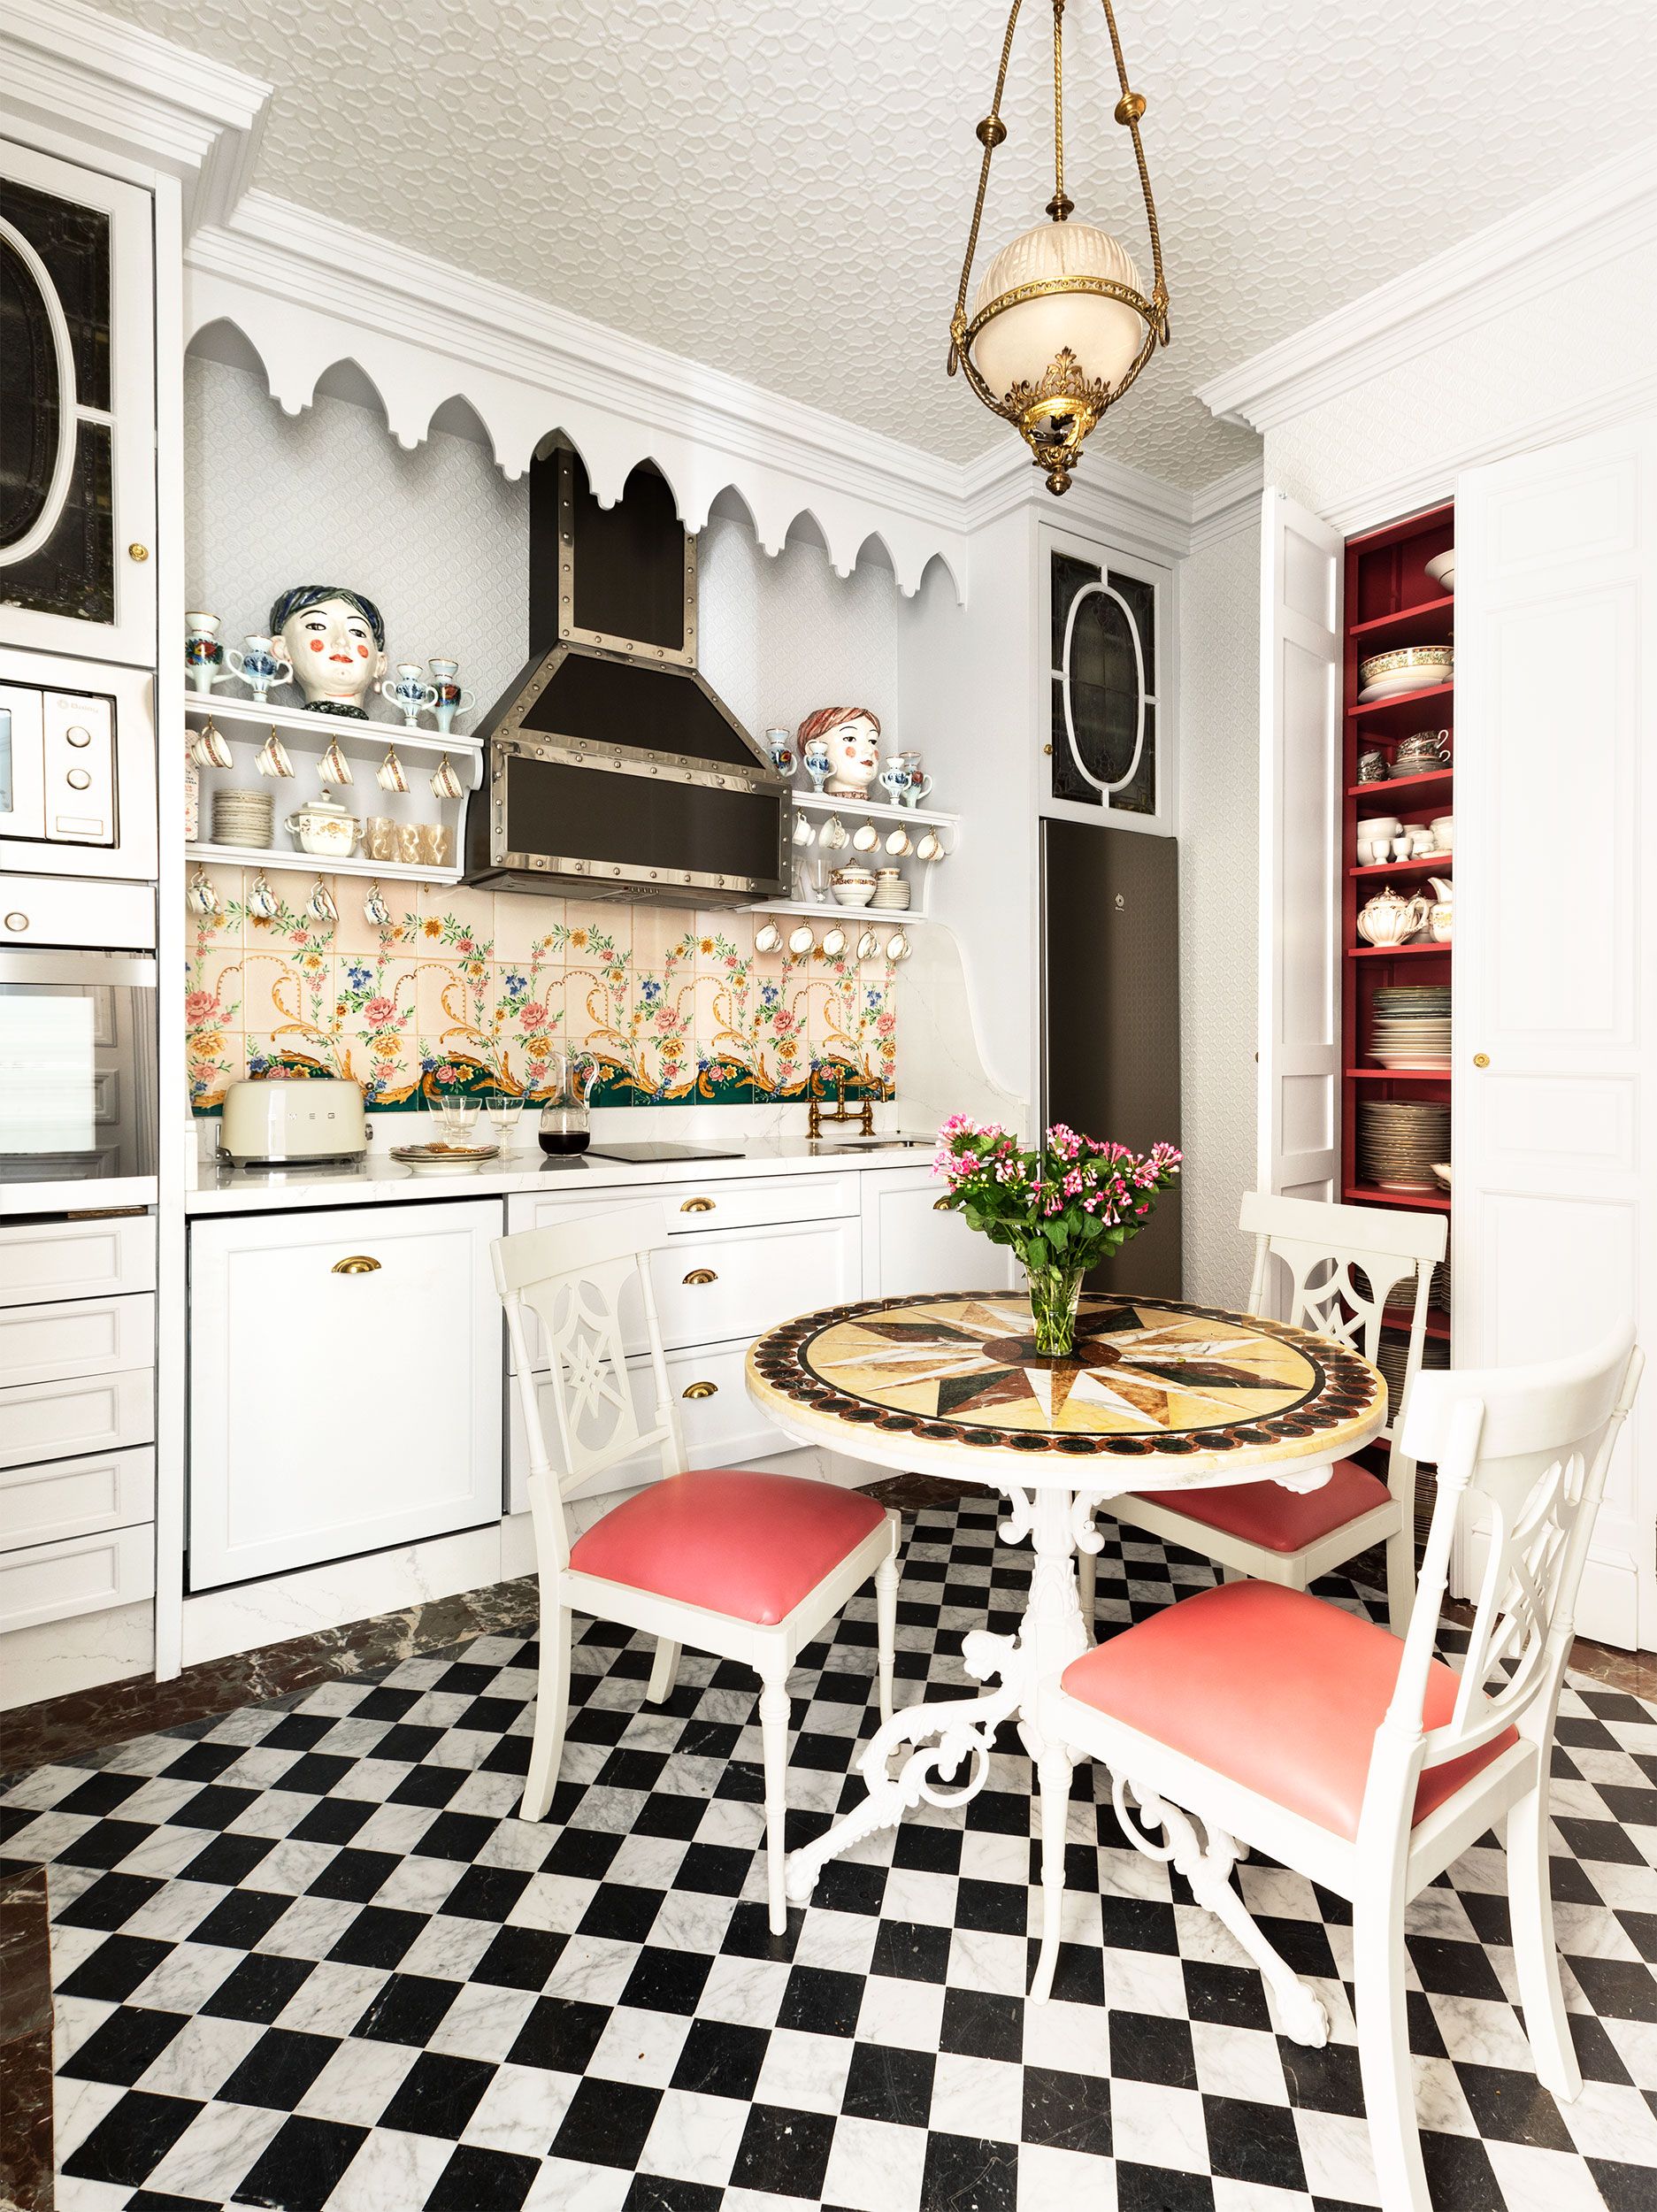 18 Gorgeous Floor Ideas for the Chicest Kitchen Ever